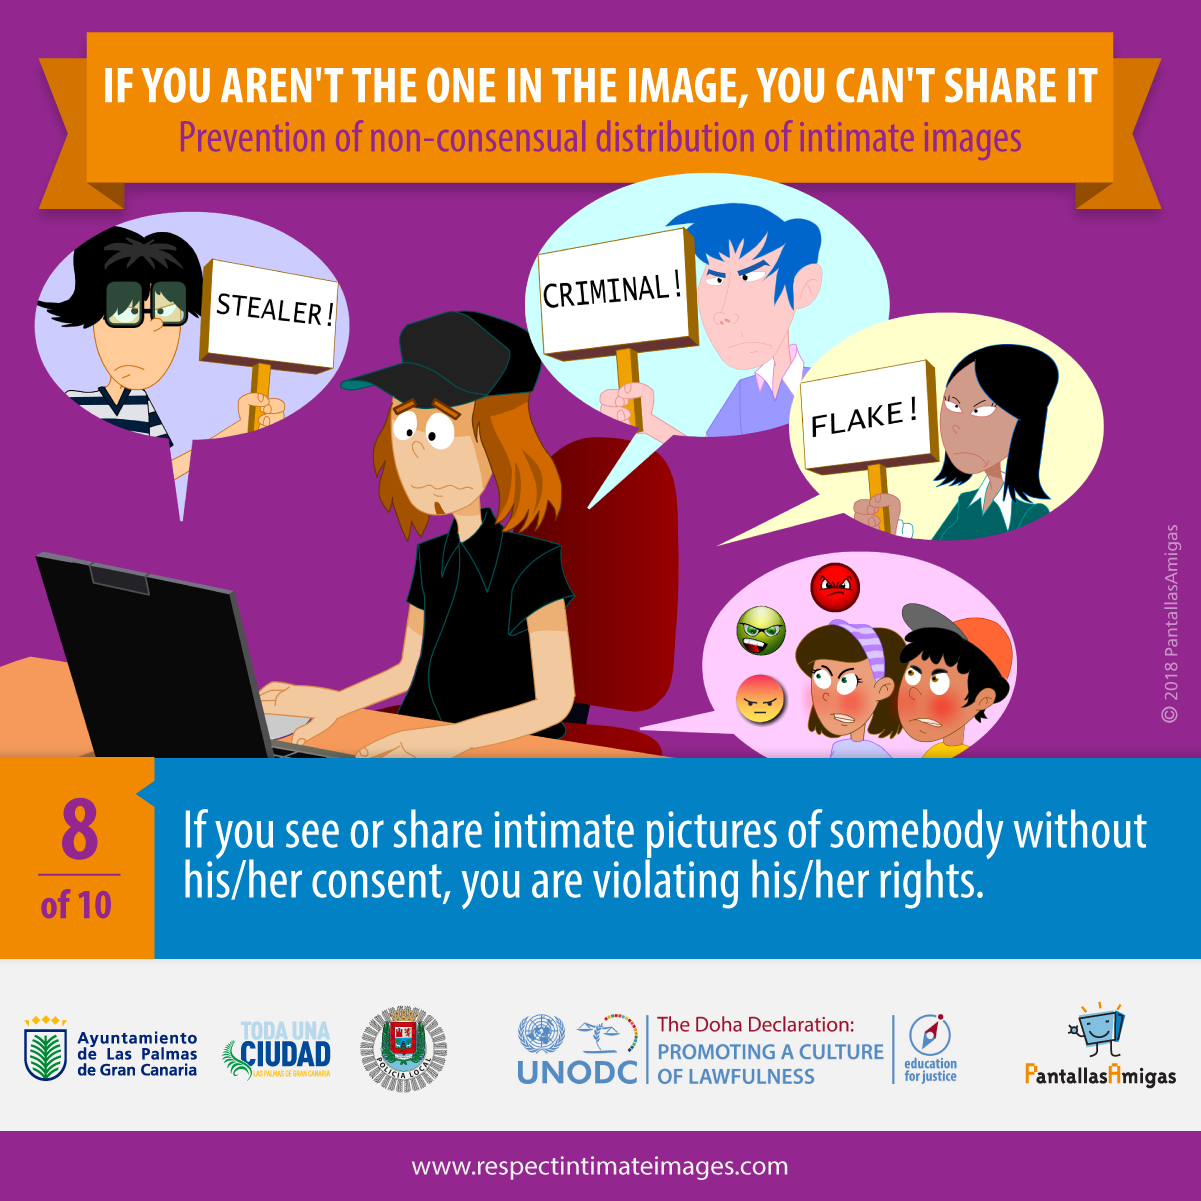 If you see or share intimate pictures of somebody without his/her consent, you are violating his/her rights.